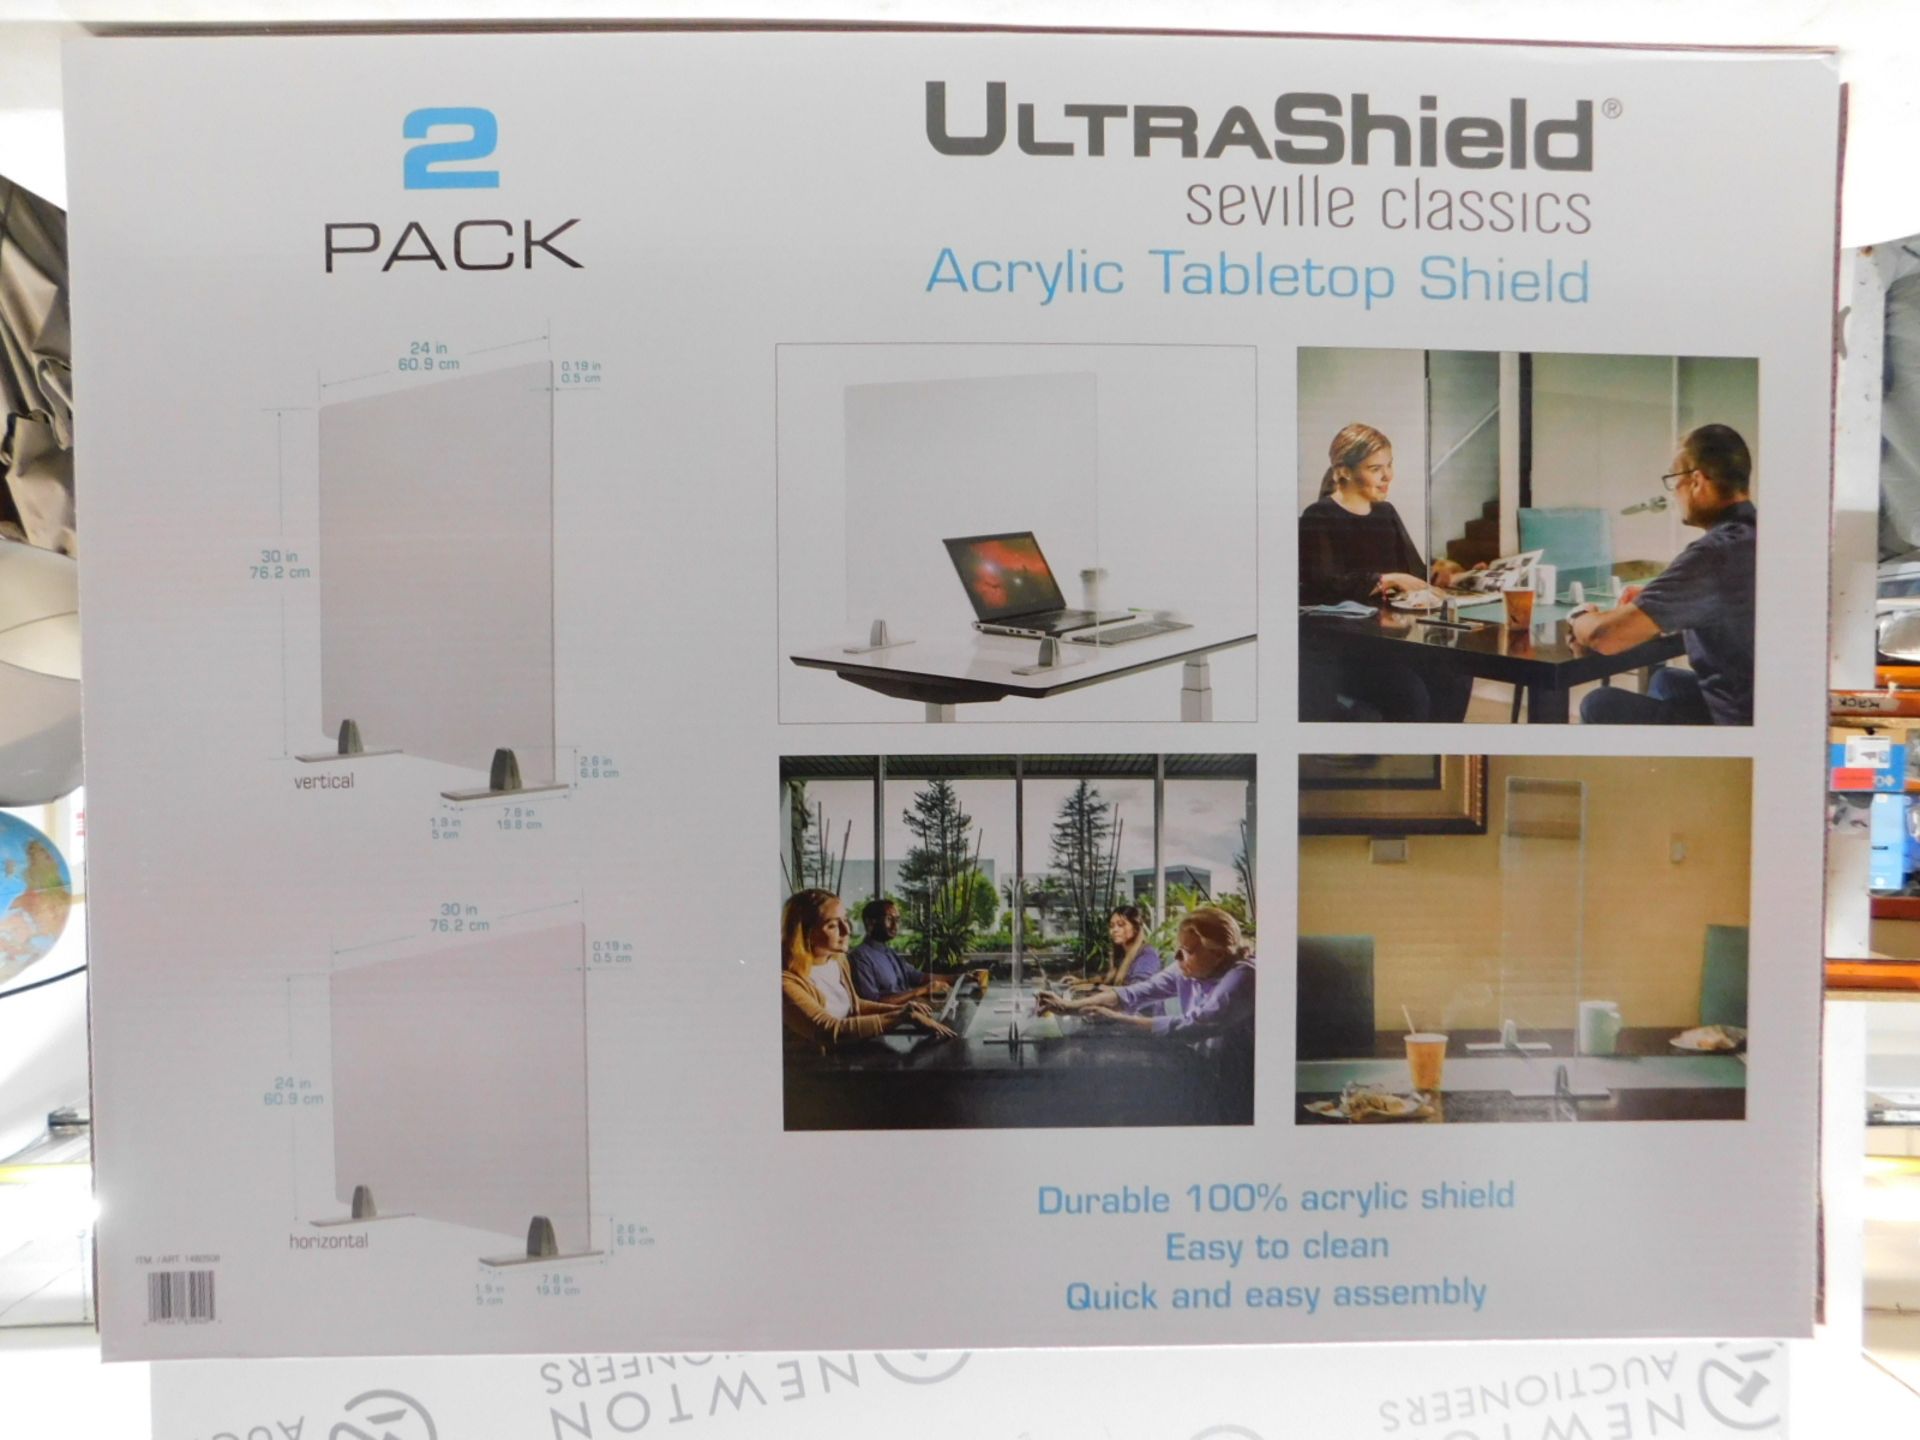 1 BRAND NEW BOXED SEVILLE CLASSICS ULTRASHIELD TABLE TOP SHIELD 2-PACK RRP Â£79.99